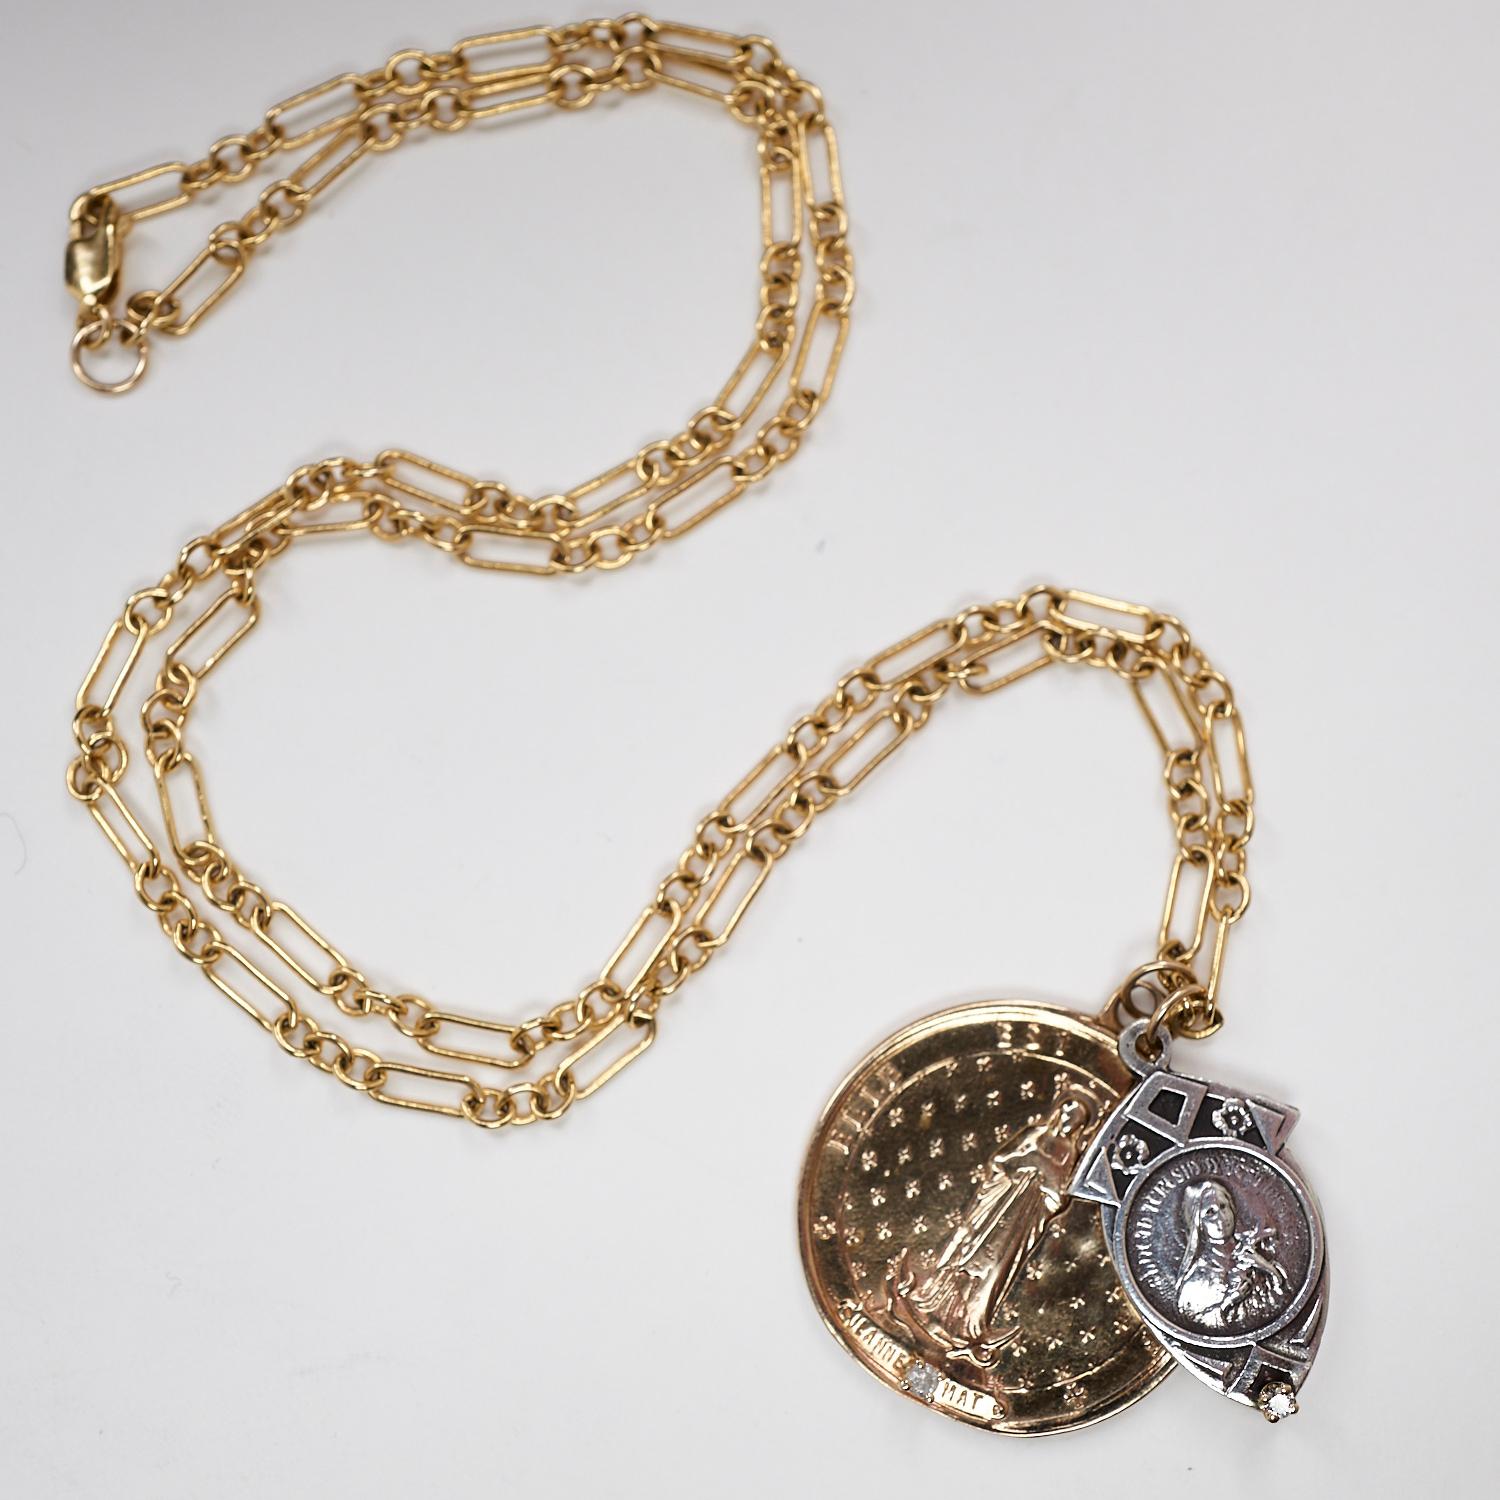 Medal Coin Necklace White Diamond Chain Pendant Virgin Mary J Dauphin In New Condition For Sale In Los Angeles, CA